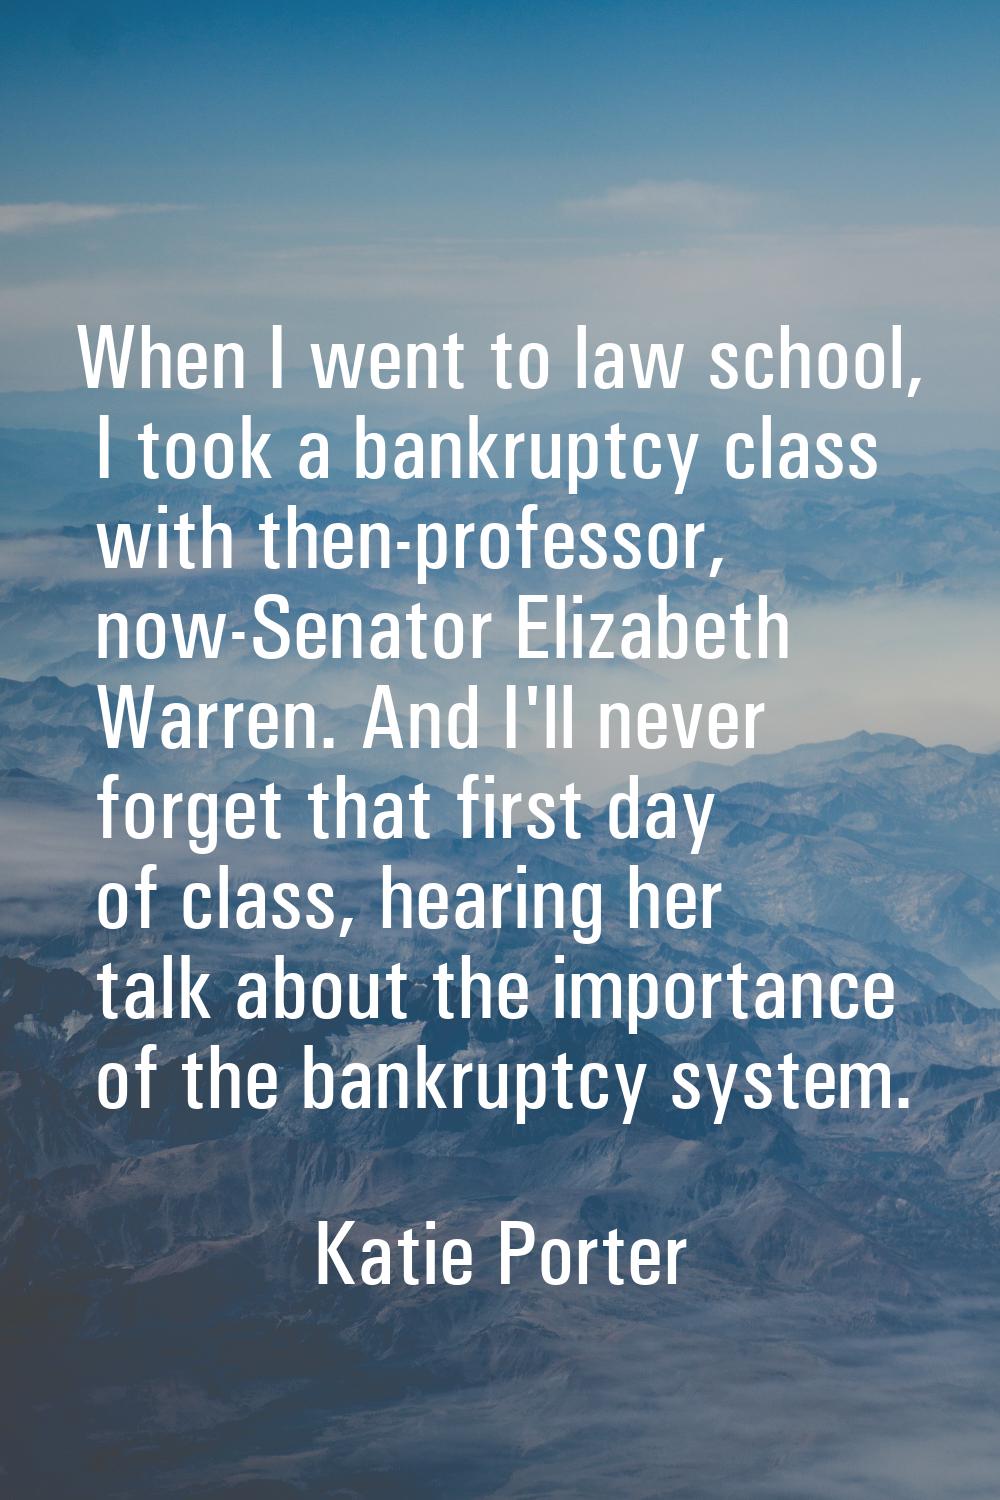 When I went to law school, I took a bankruptcy class with then-professor, now-Senator Elizabeth War